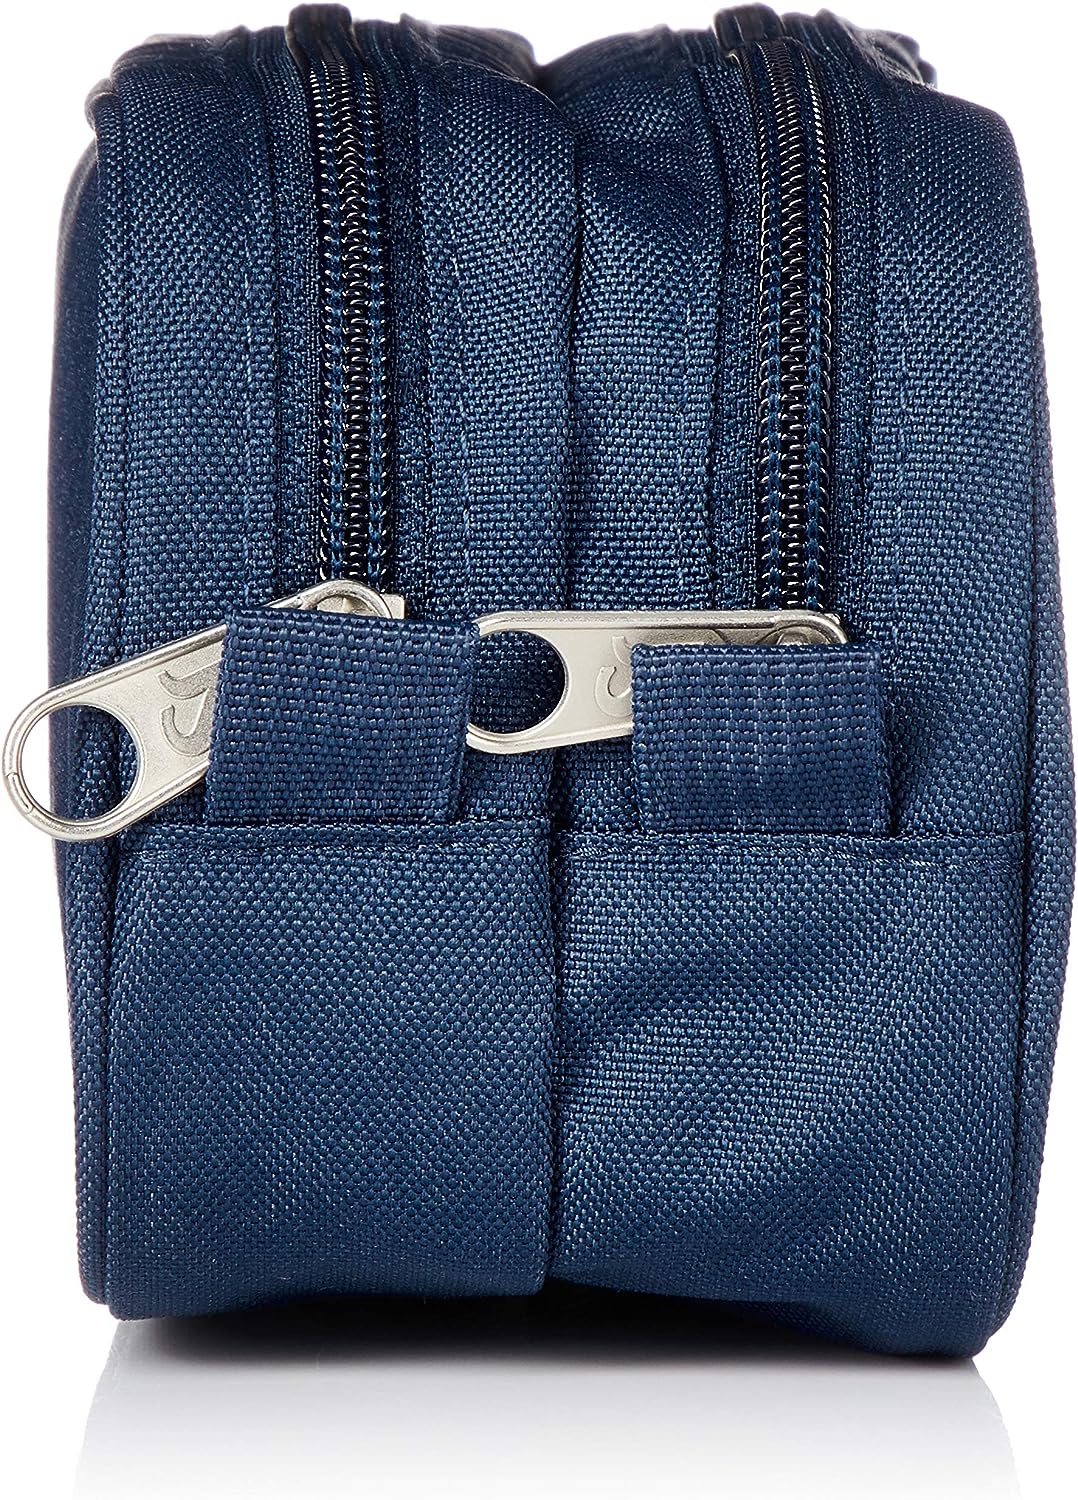 Jansport Large Accessory Pouch Navy